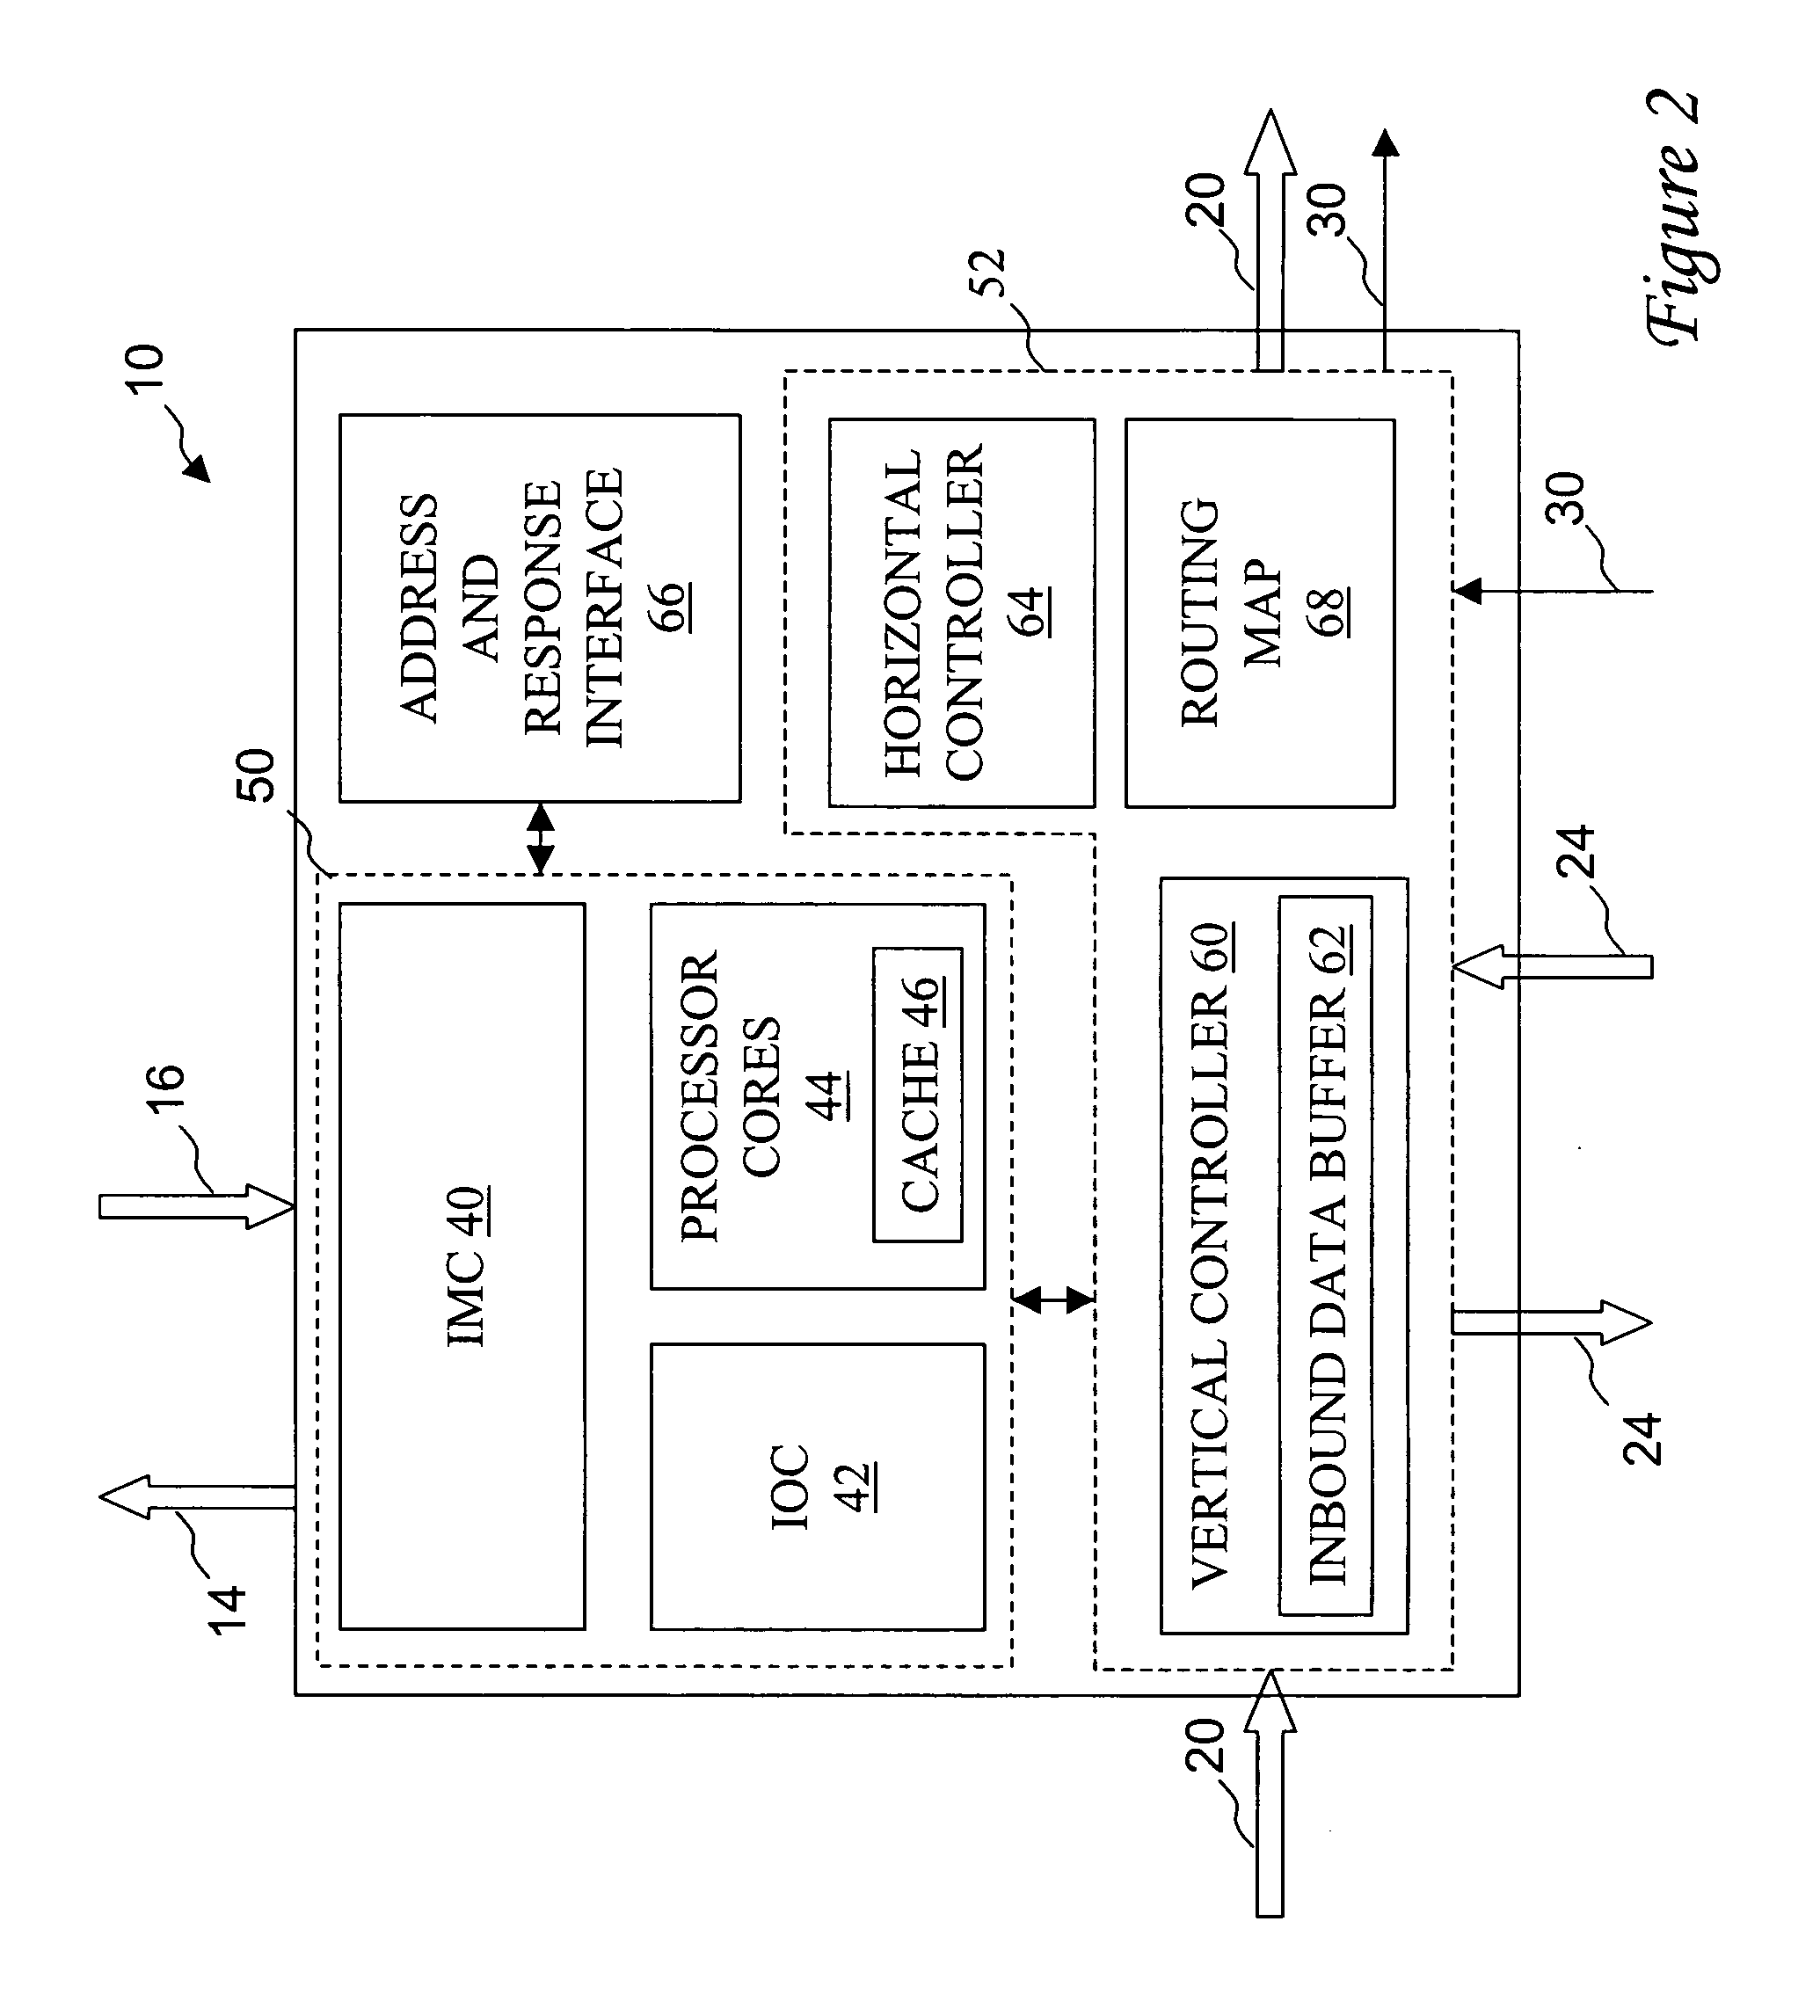 Multiprocessor data processing system having scalable data interconnect and data routing mechanism